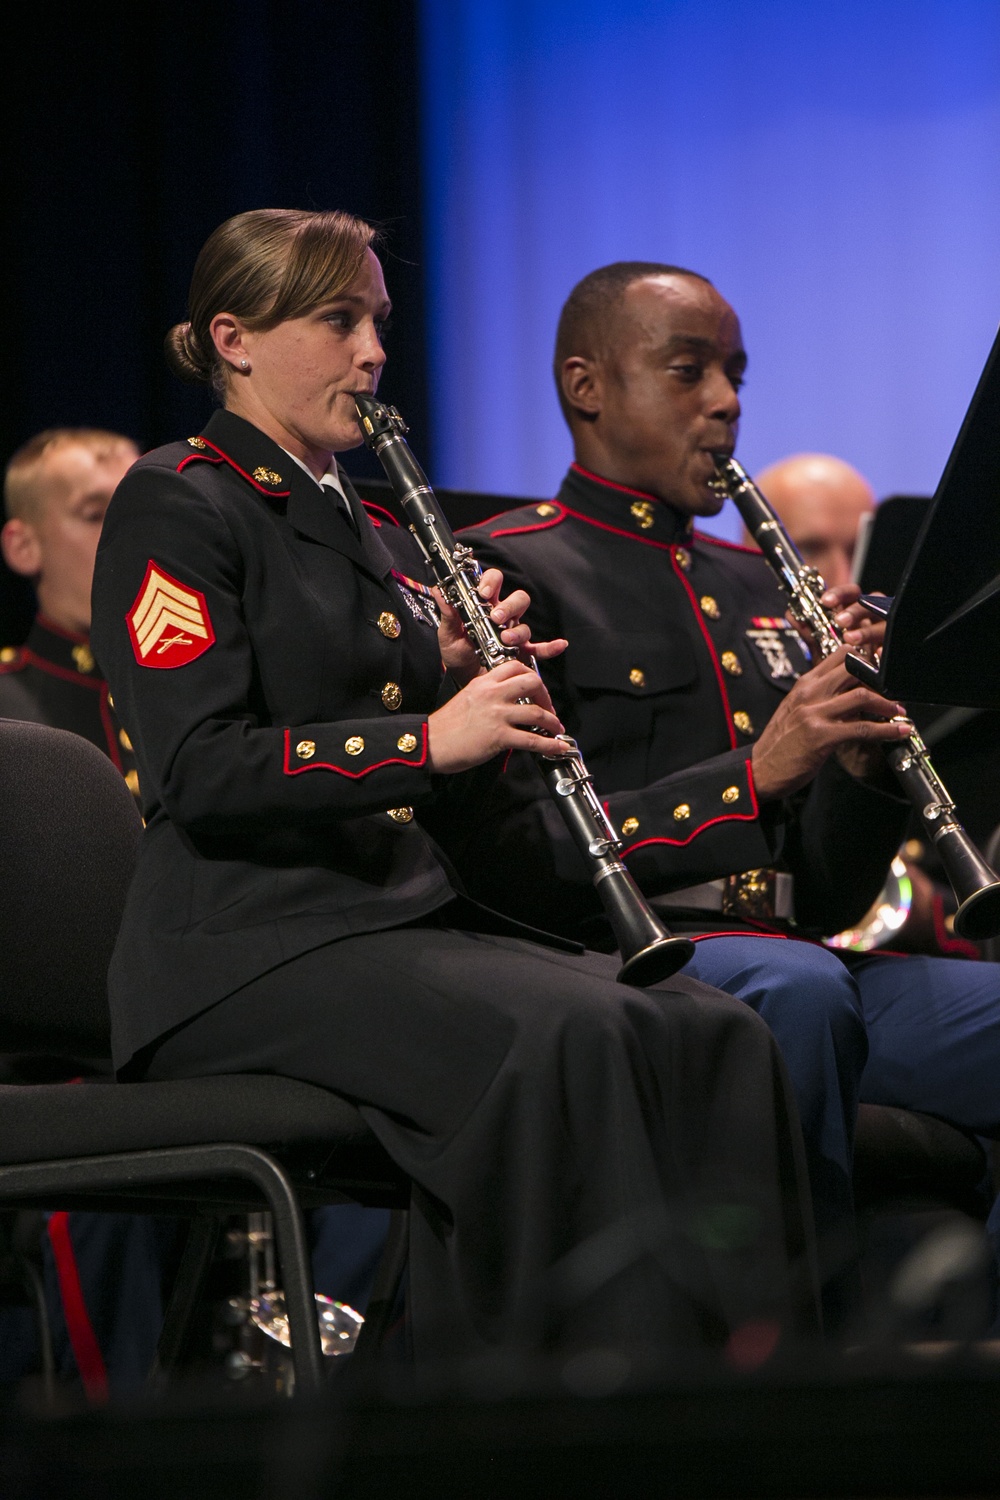 Performance at Battery Creek High School featuring Parris Island Marine Band